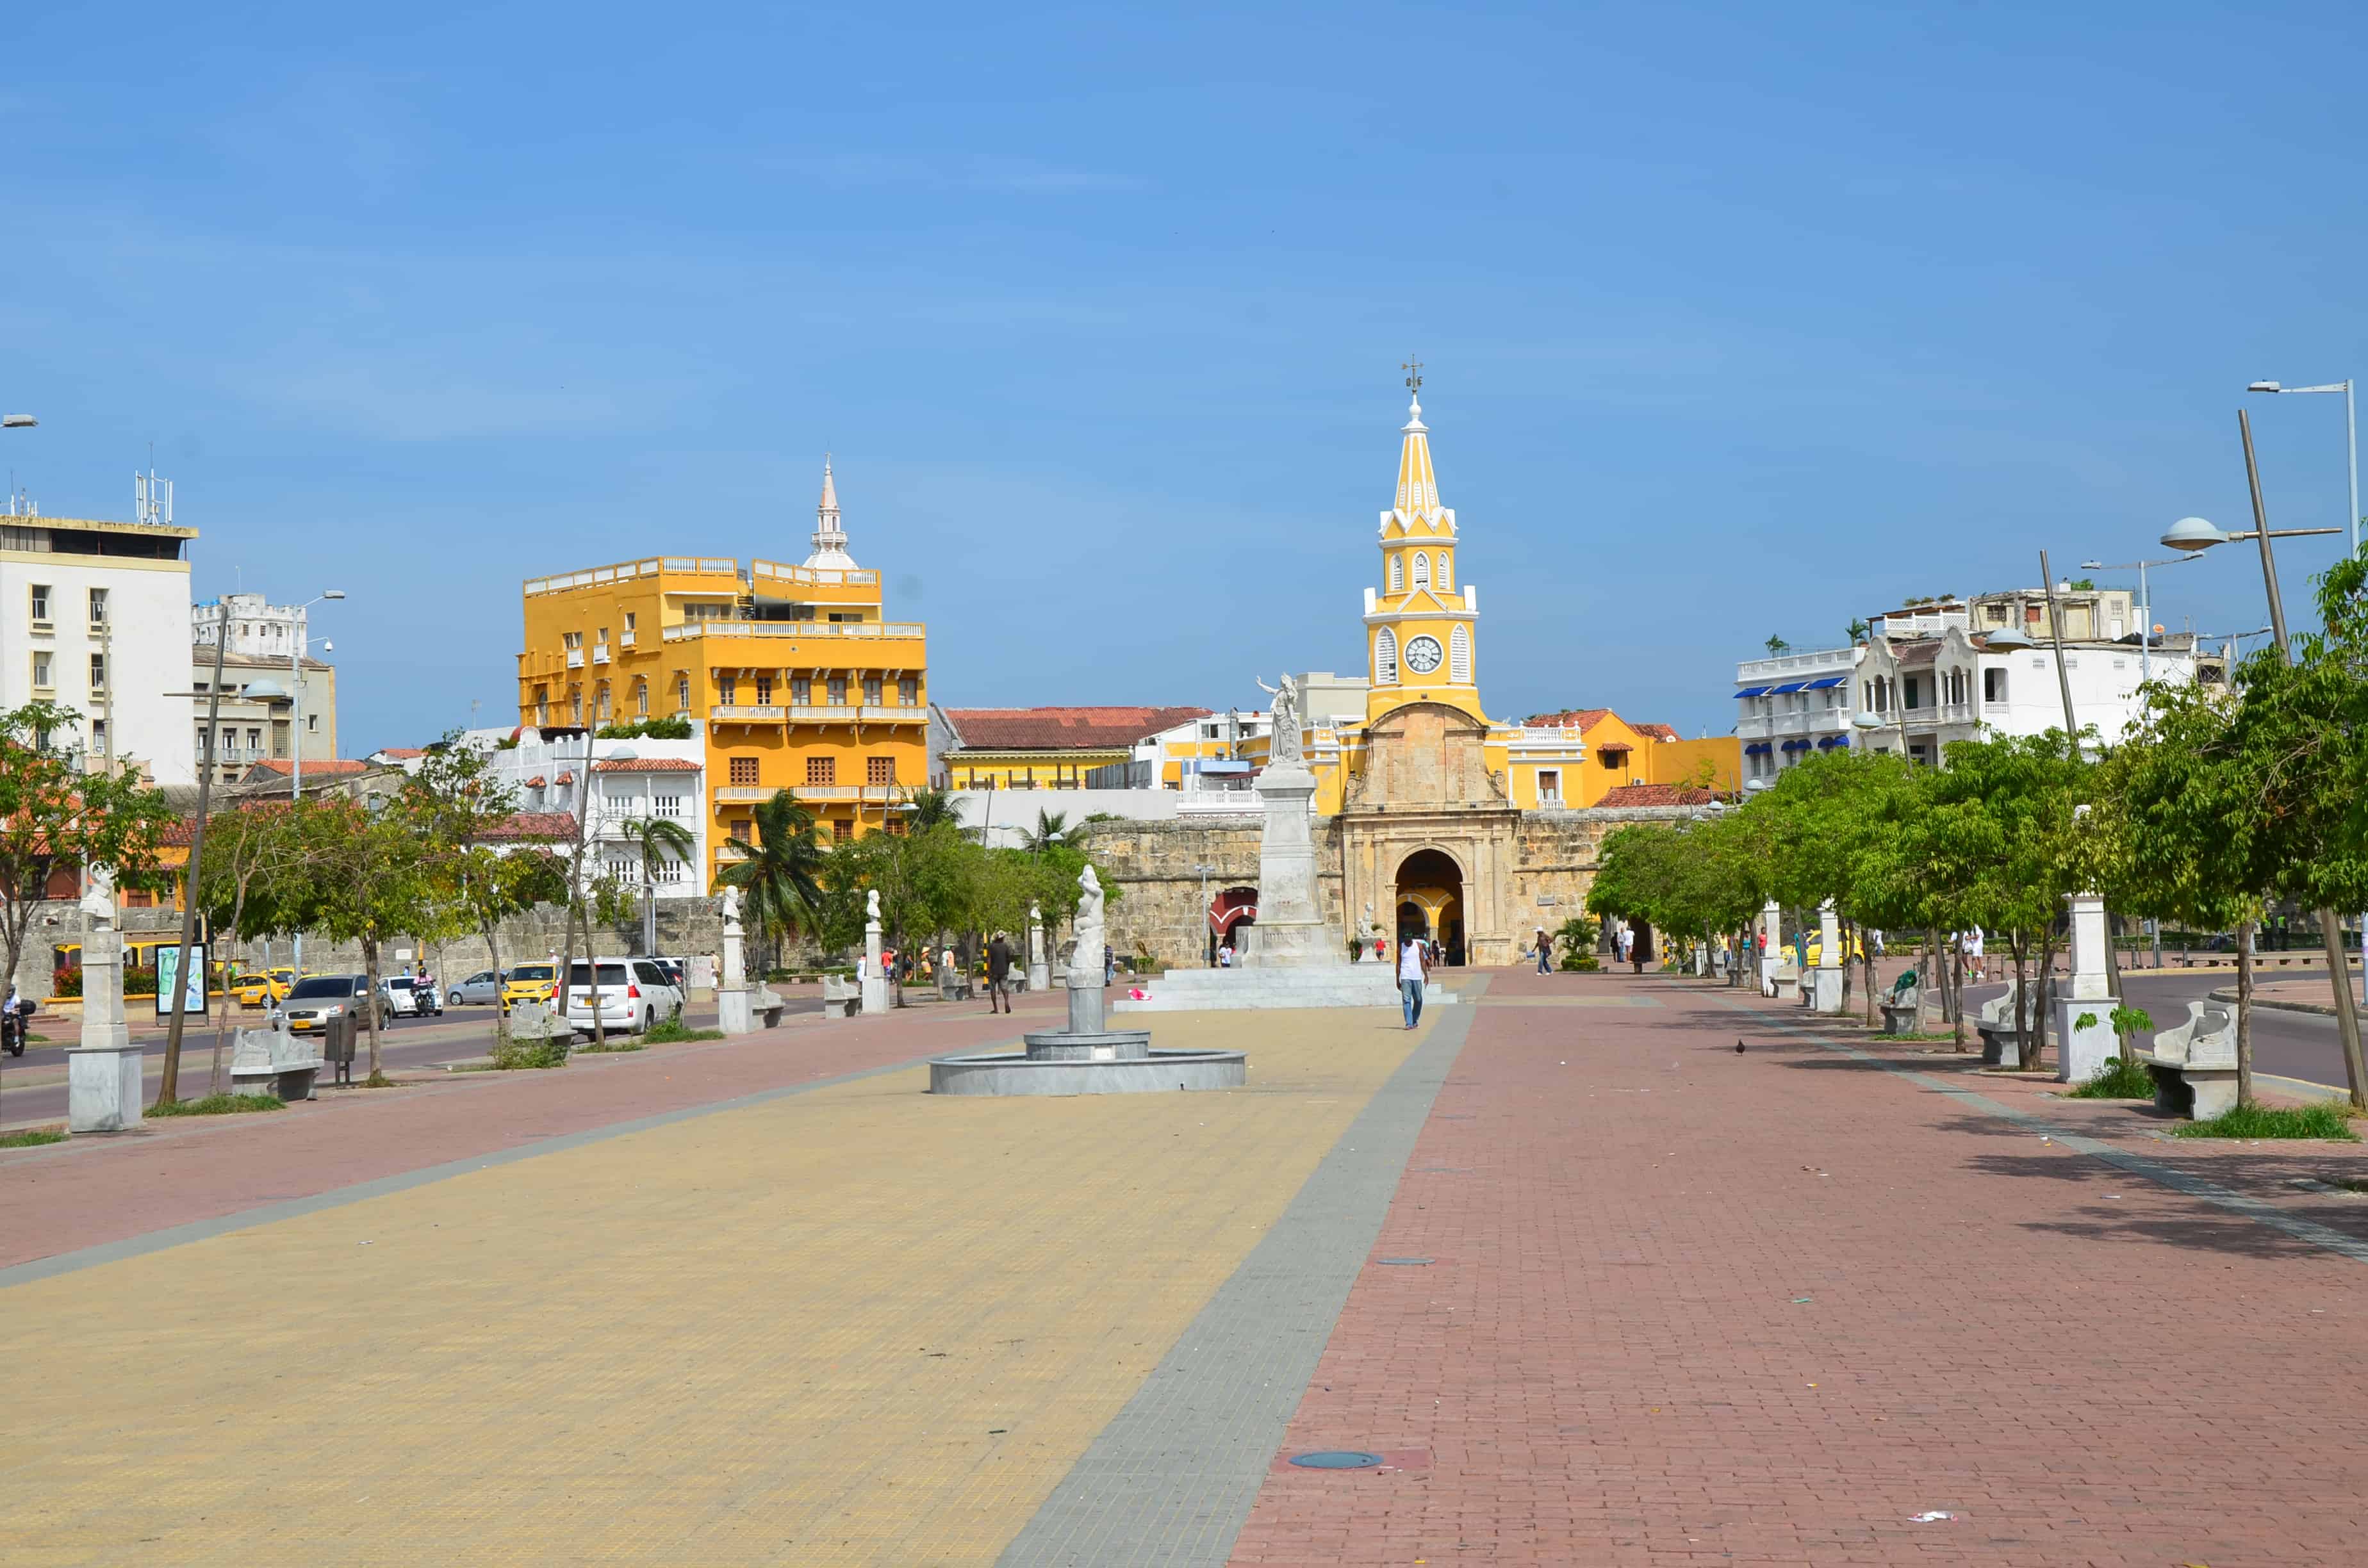 Plaza of the Martyrs in Cartagena, Colombia